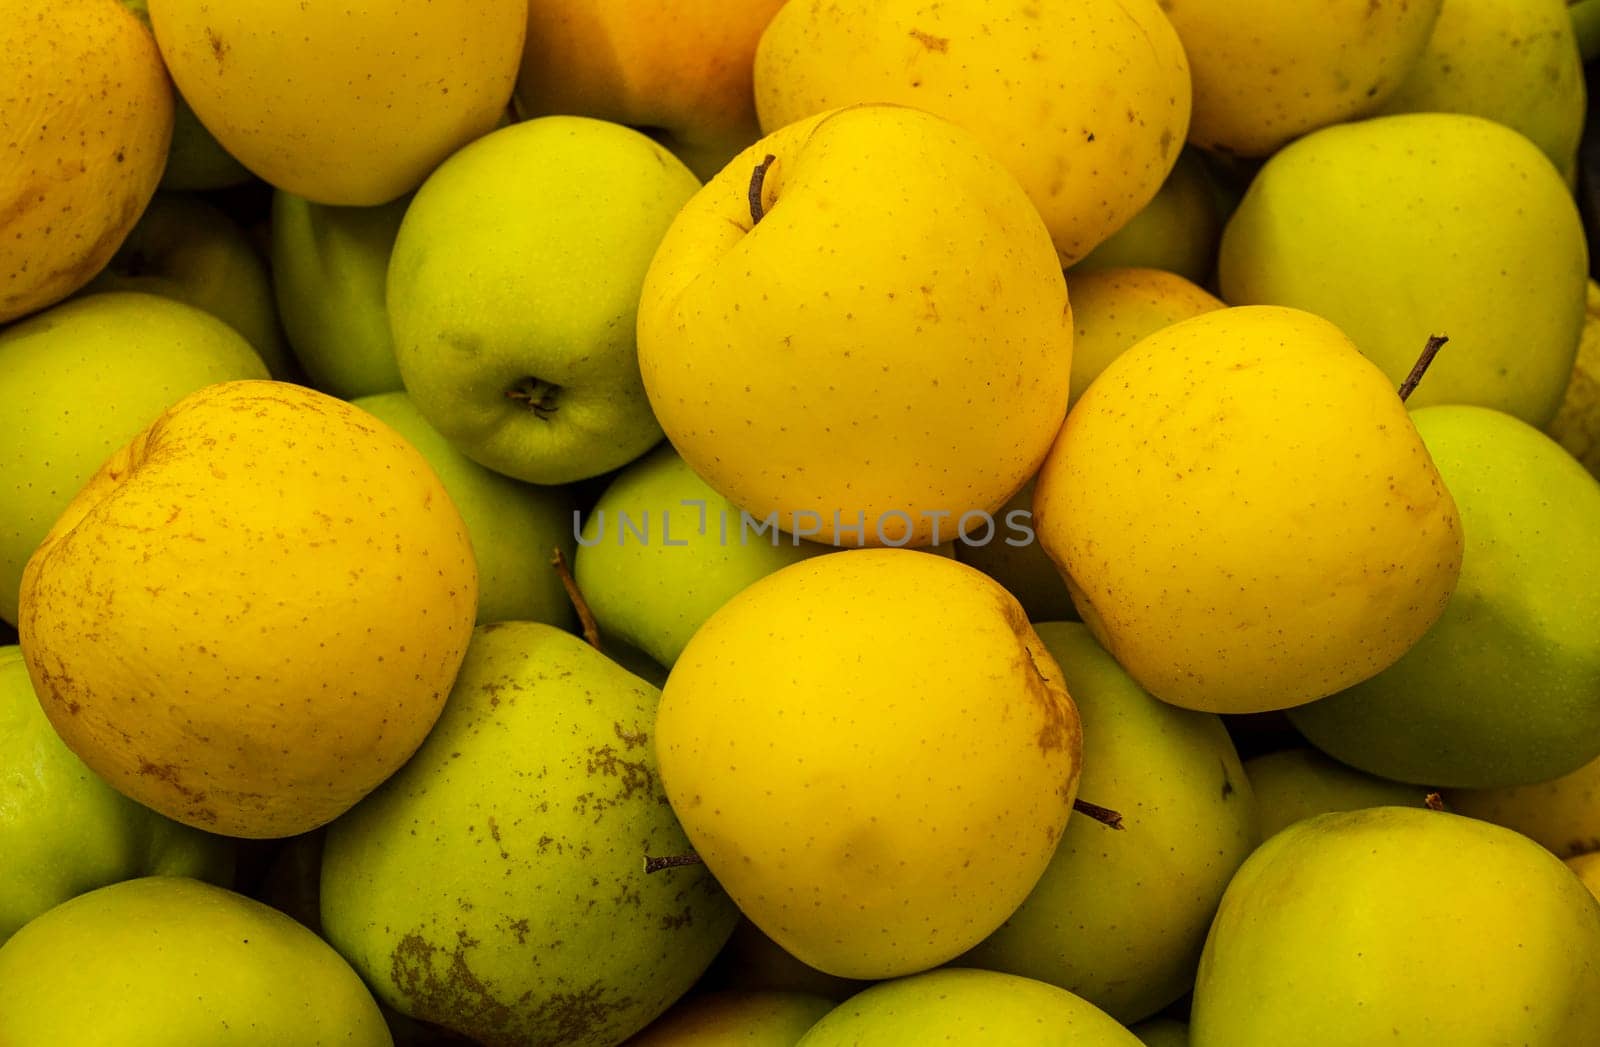 background of green and yellow apples in a fruit market. background of apples of different colors